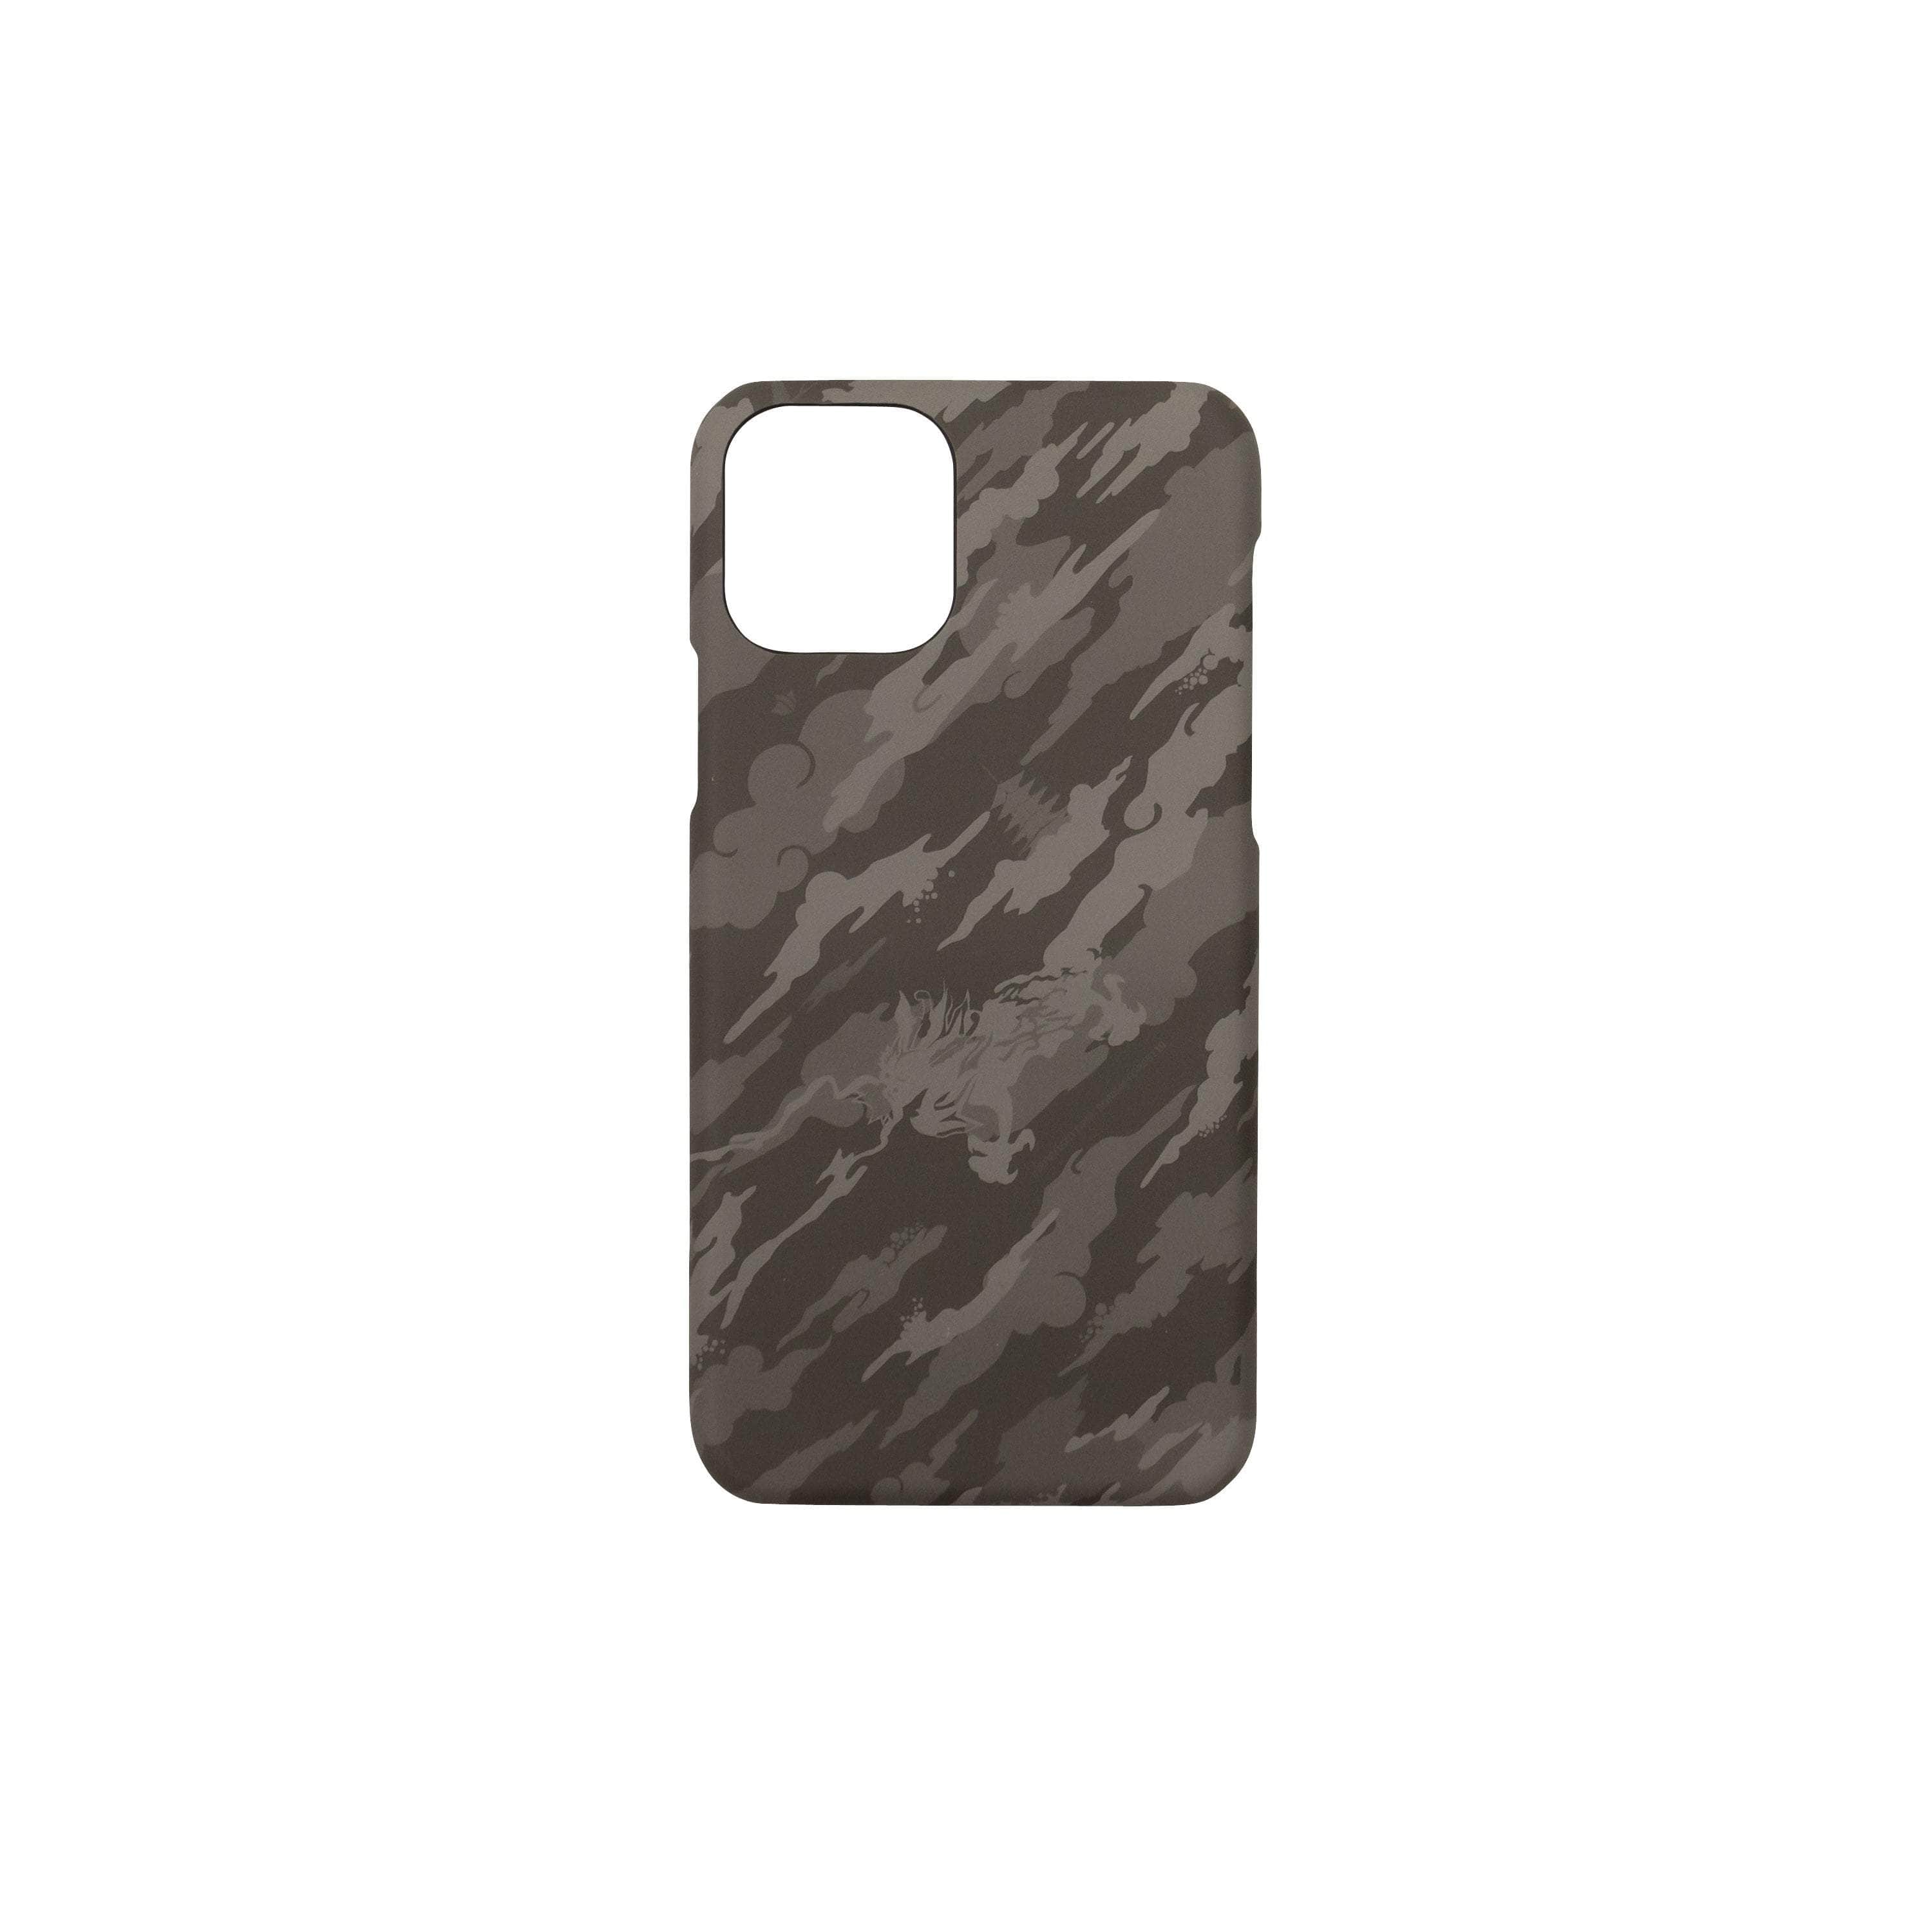 Maharishi couponcollection, gender-mens, gender-womens, maharishi, main-accessories, mens-shoes, size-os, tech-accessories, under-250 OS Grey Camo iPhone 11 Pro Phone Case 95-MSI-3001/OS 95-MSI-3001/OS